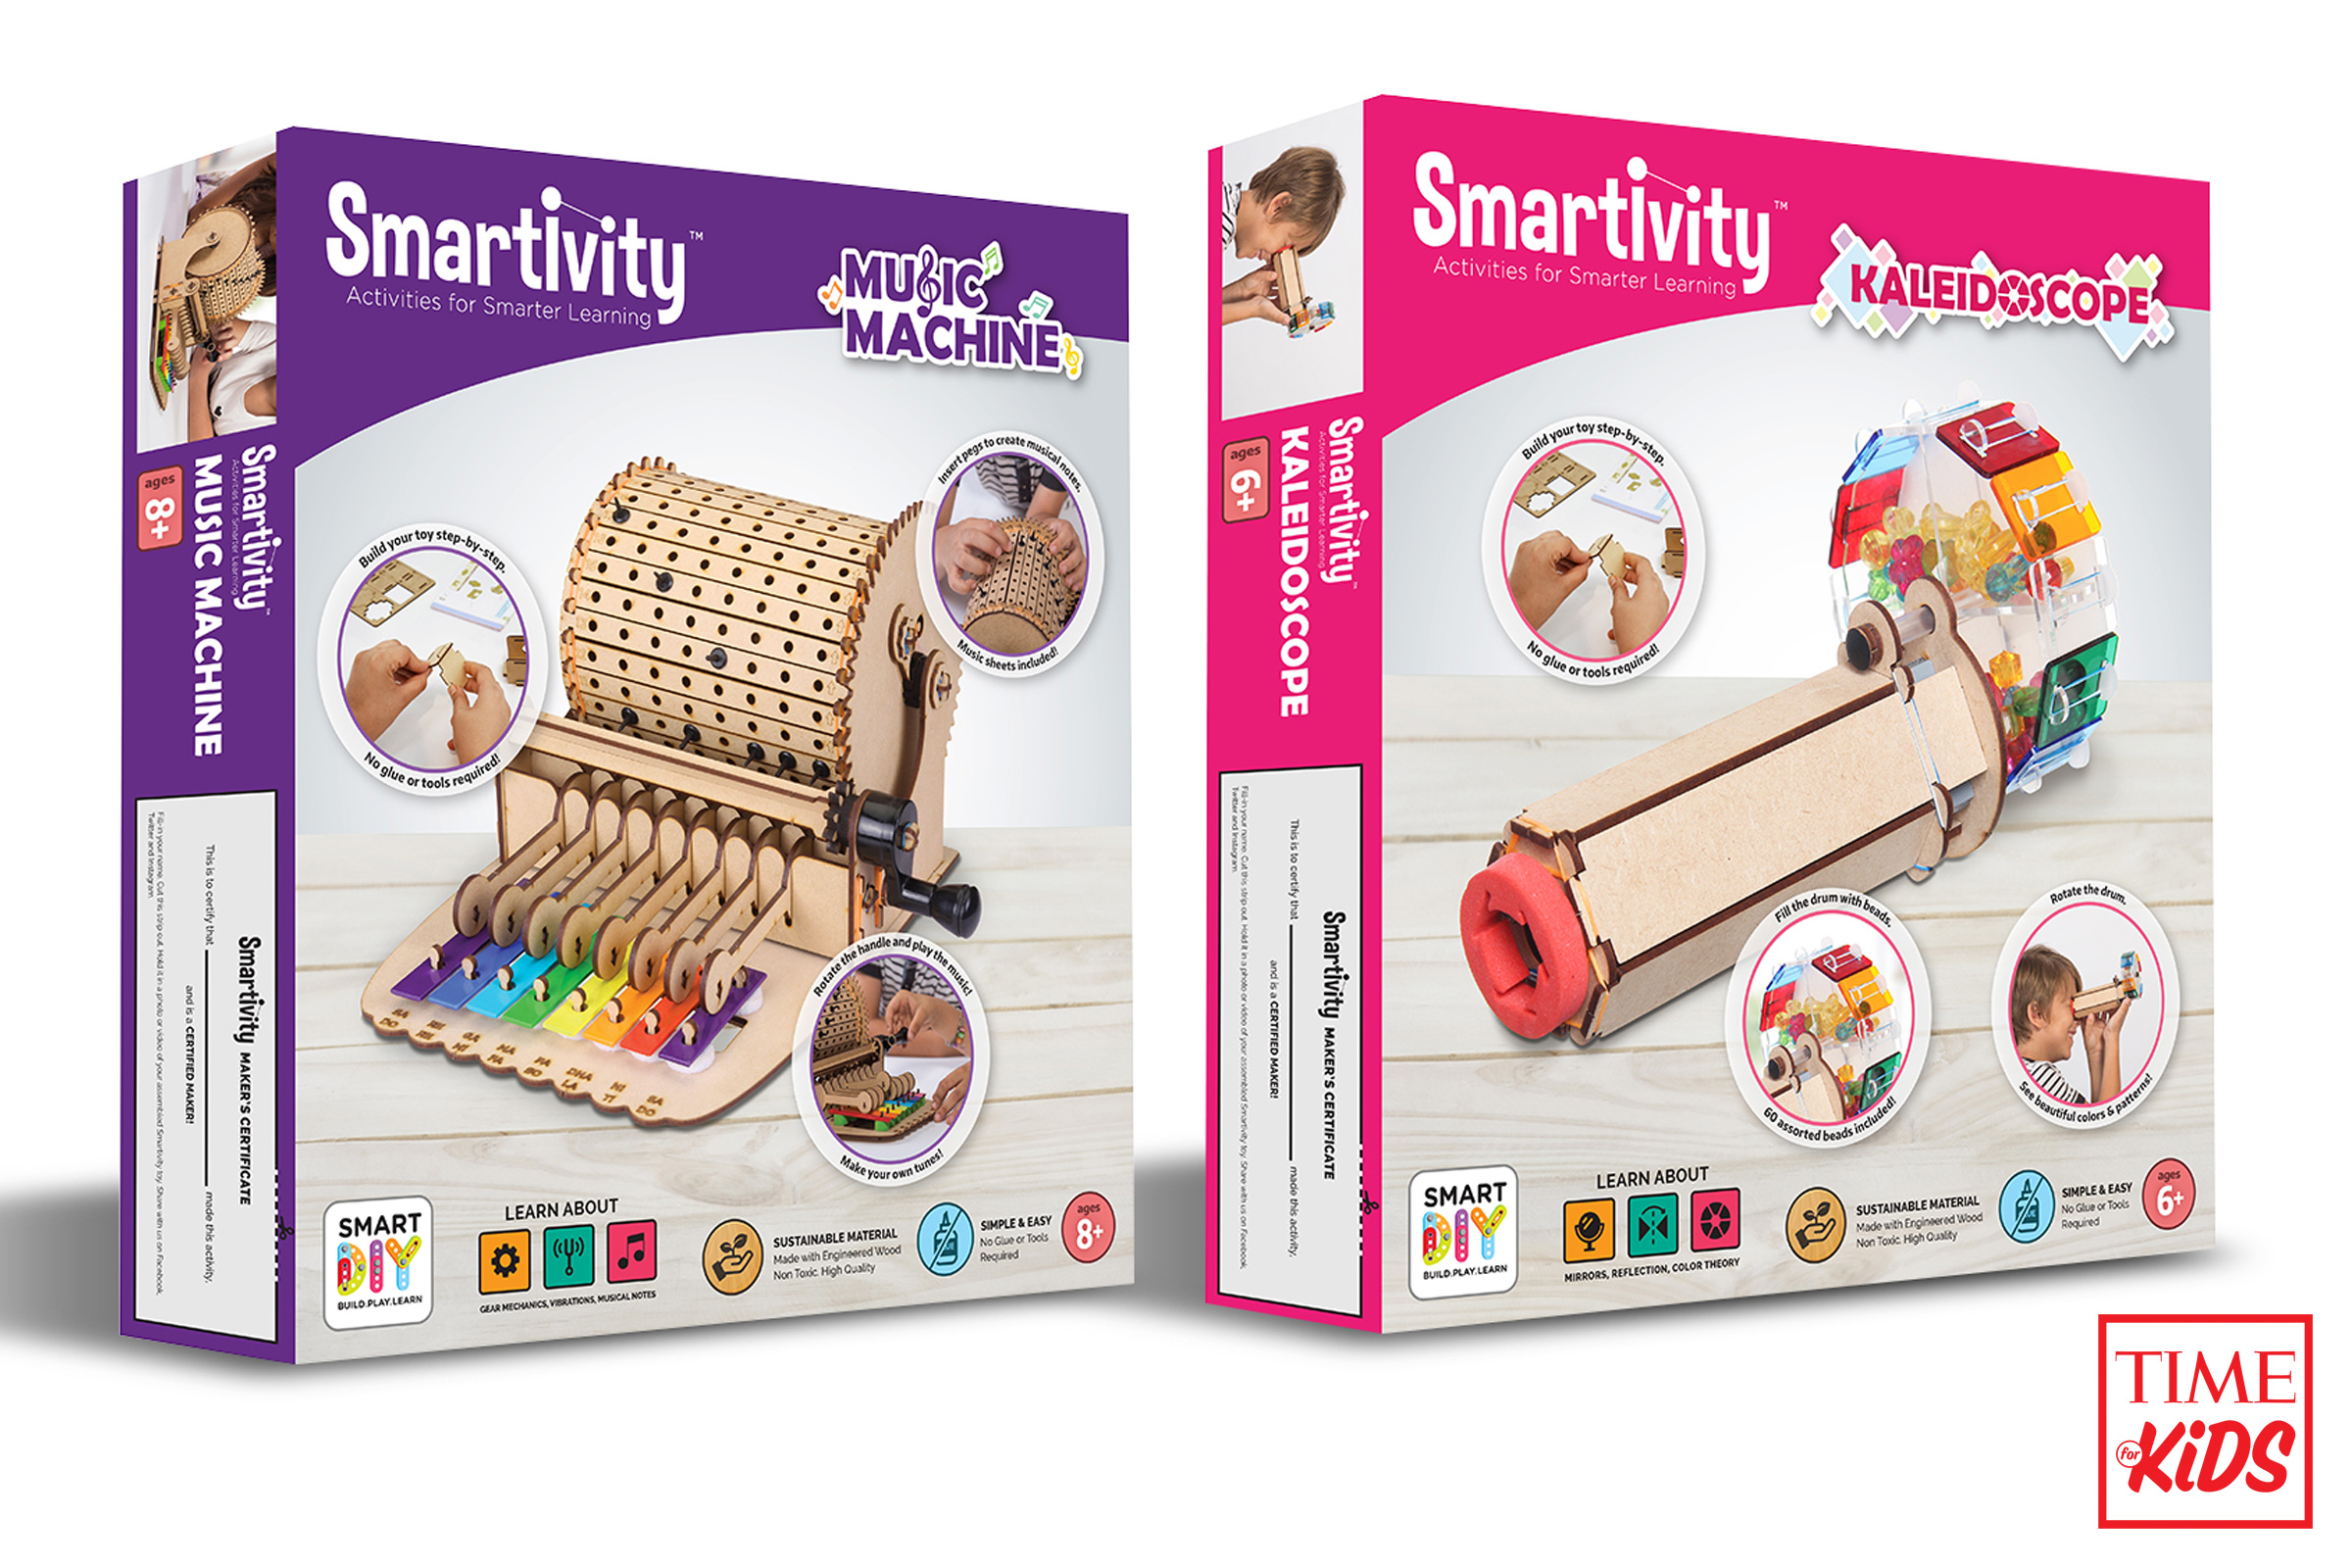 Picture of Smartivity kits for toy guide.